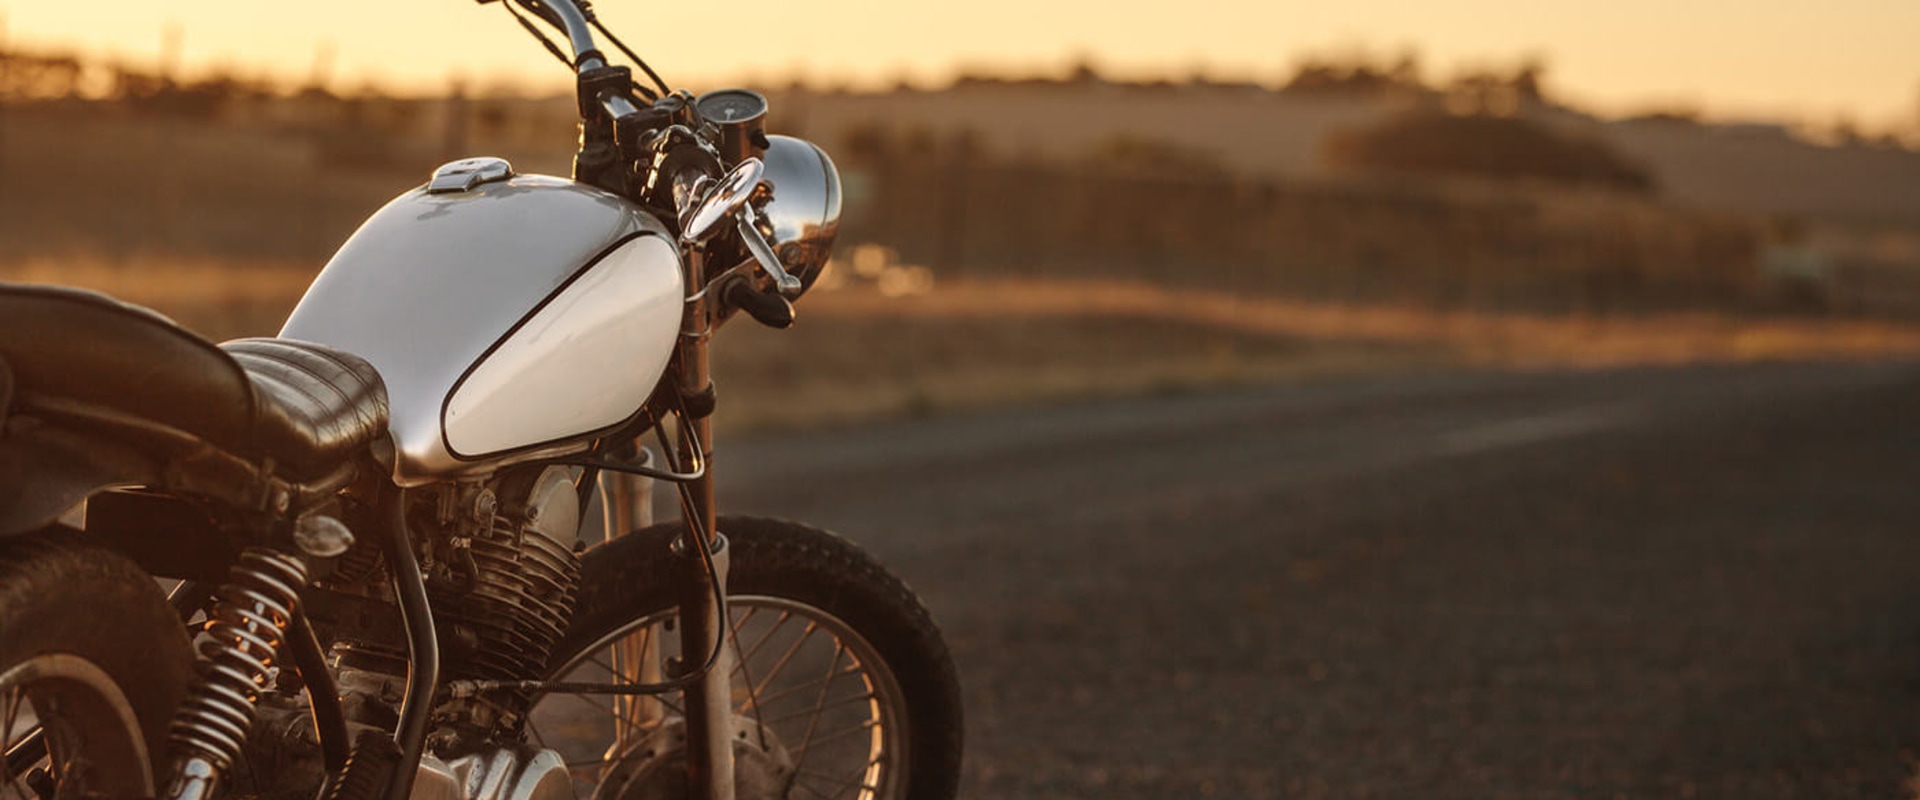 Why You Should Invest in Motorcycle Insurance